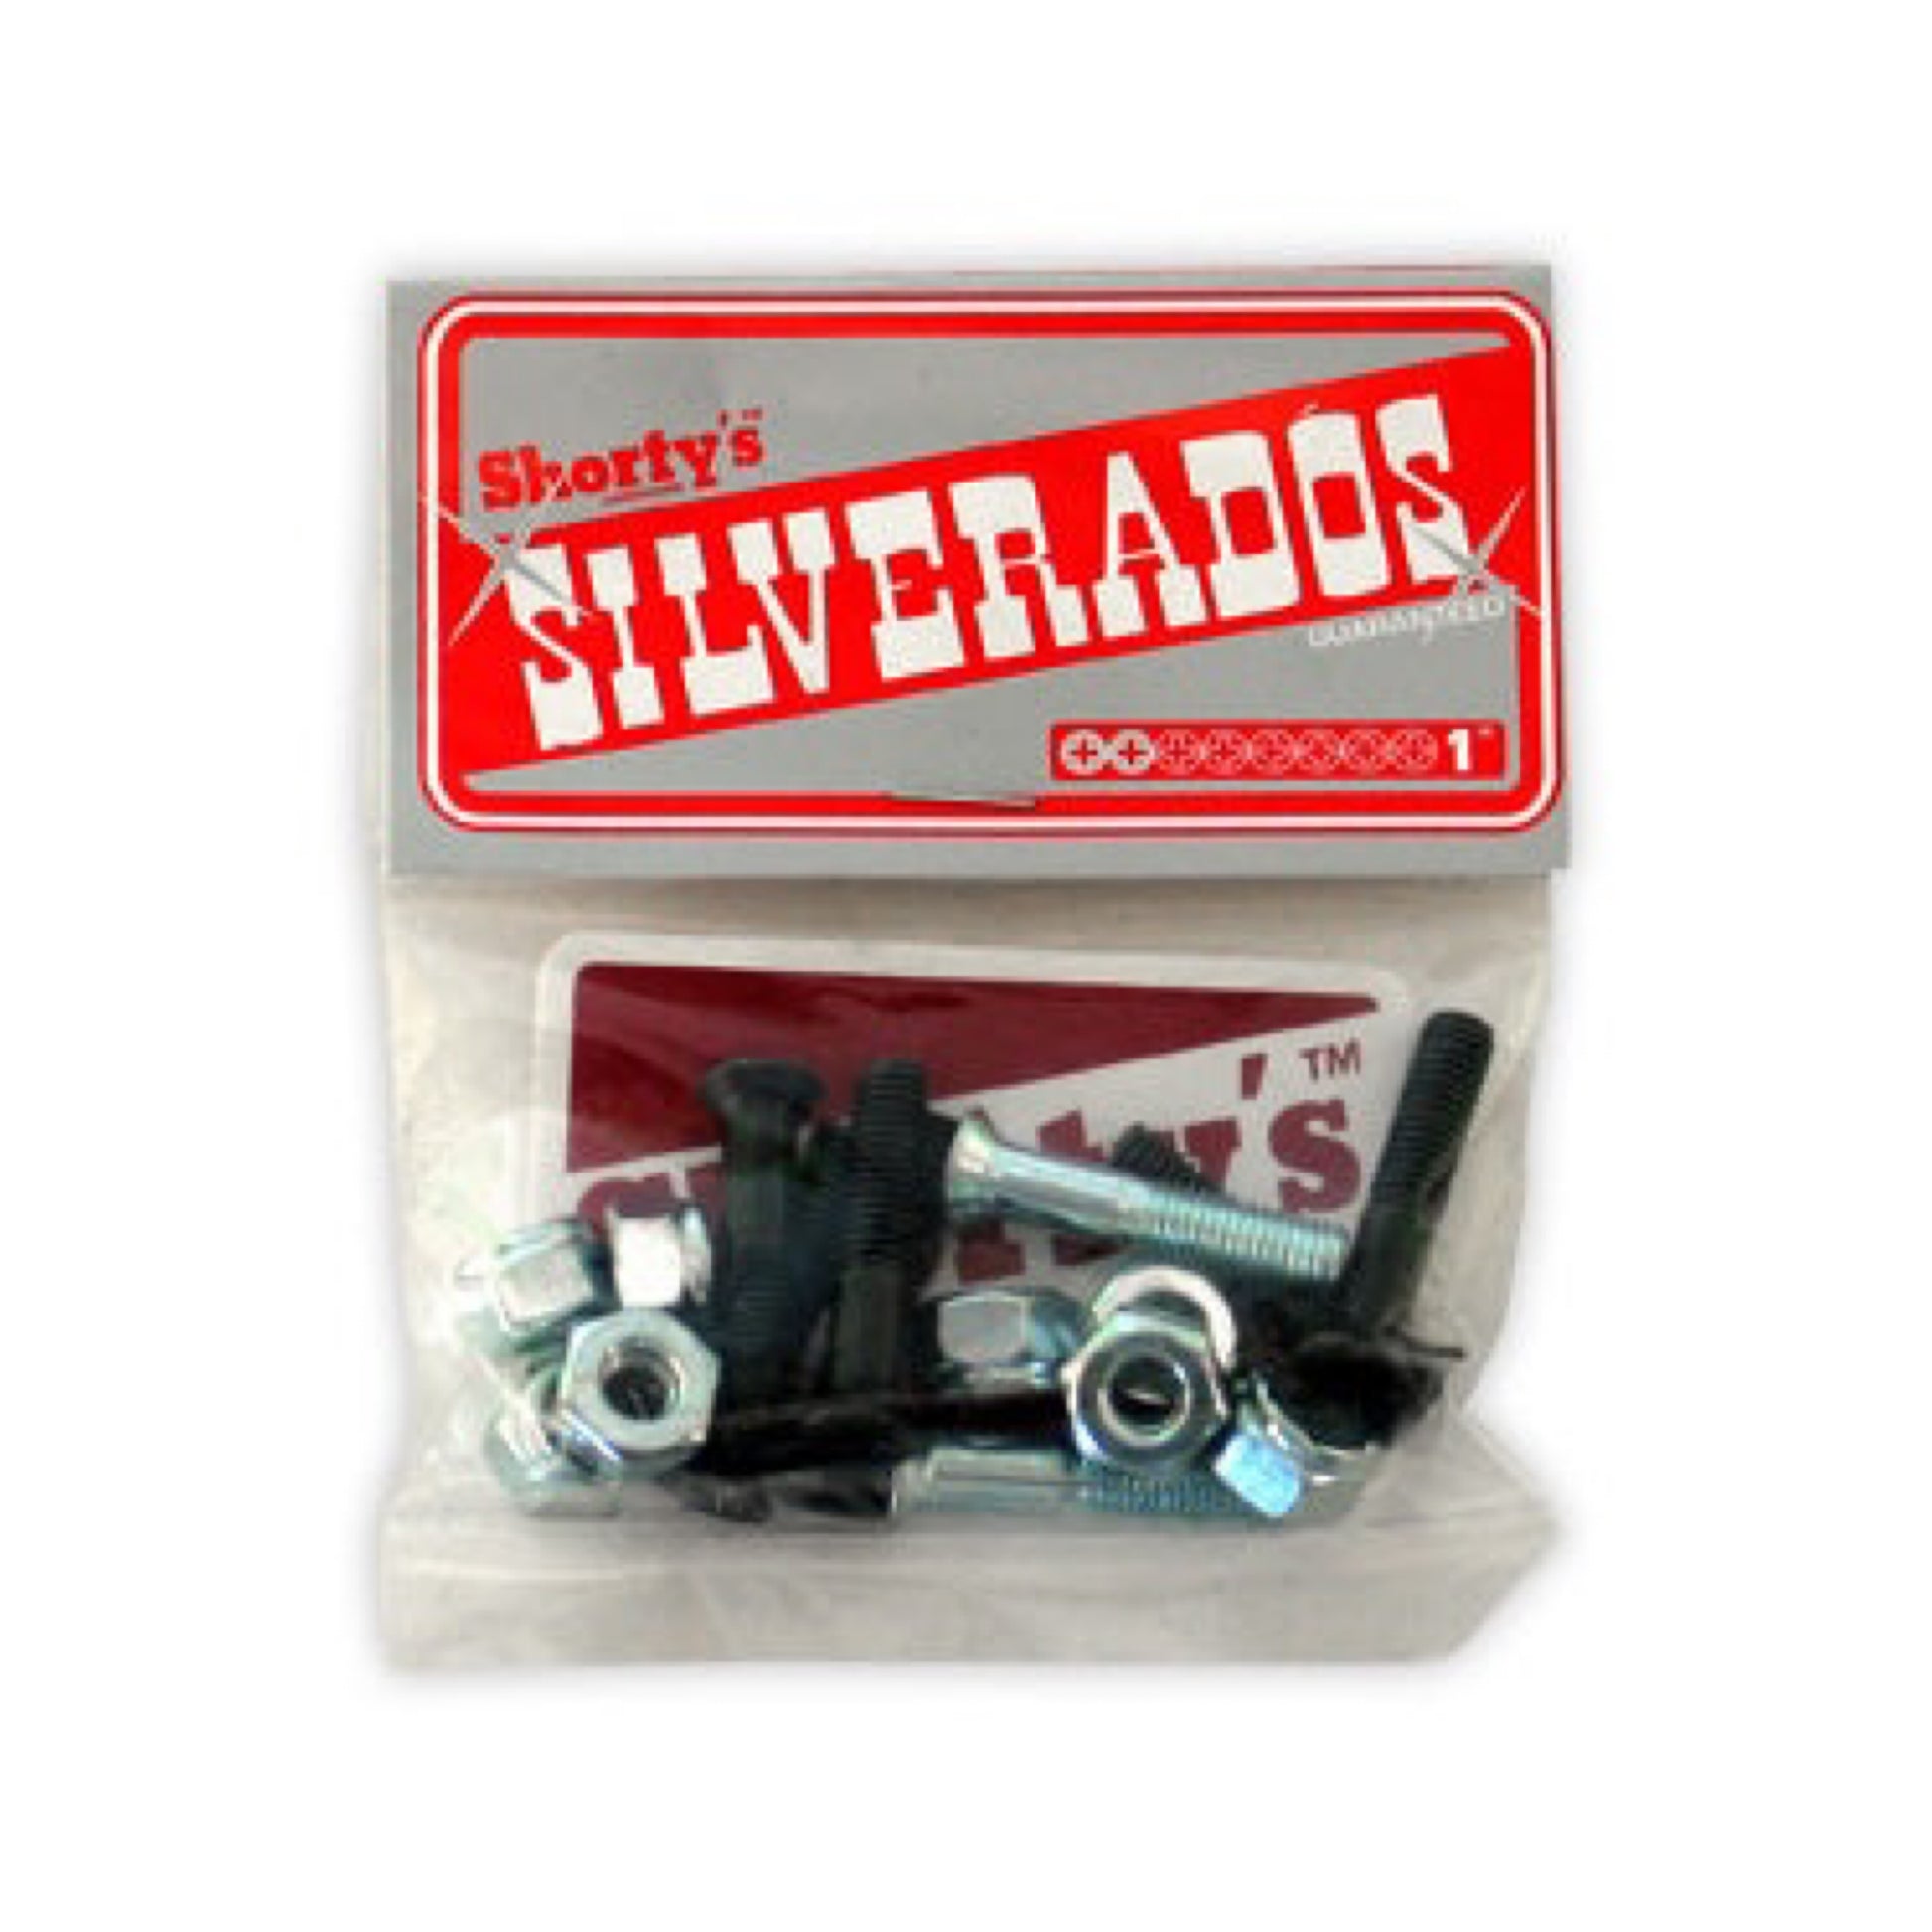 Shorty's Silverados Phillips Skateboard Hardware; Silver and red package with a clear portion for displaying the hardware; Includes silver and black bolts and nuts for skateboard assembly;